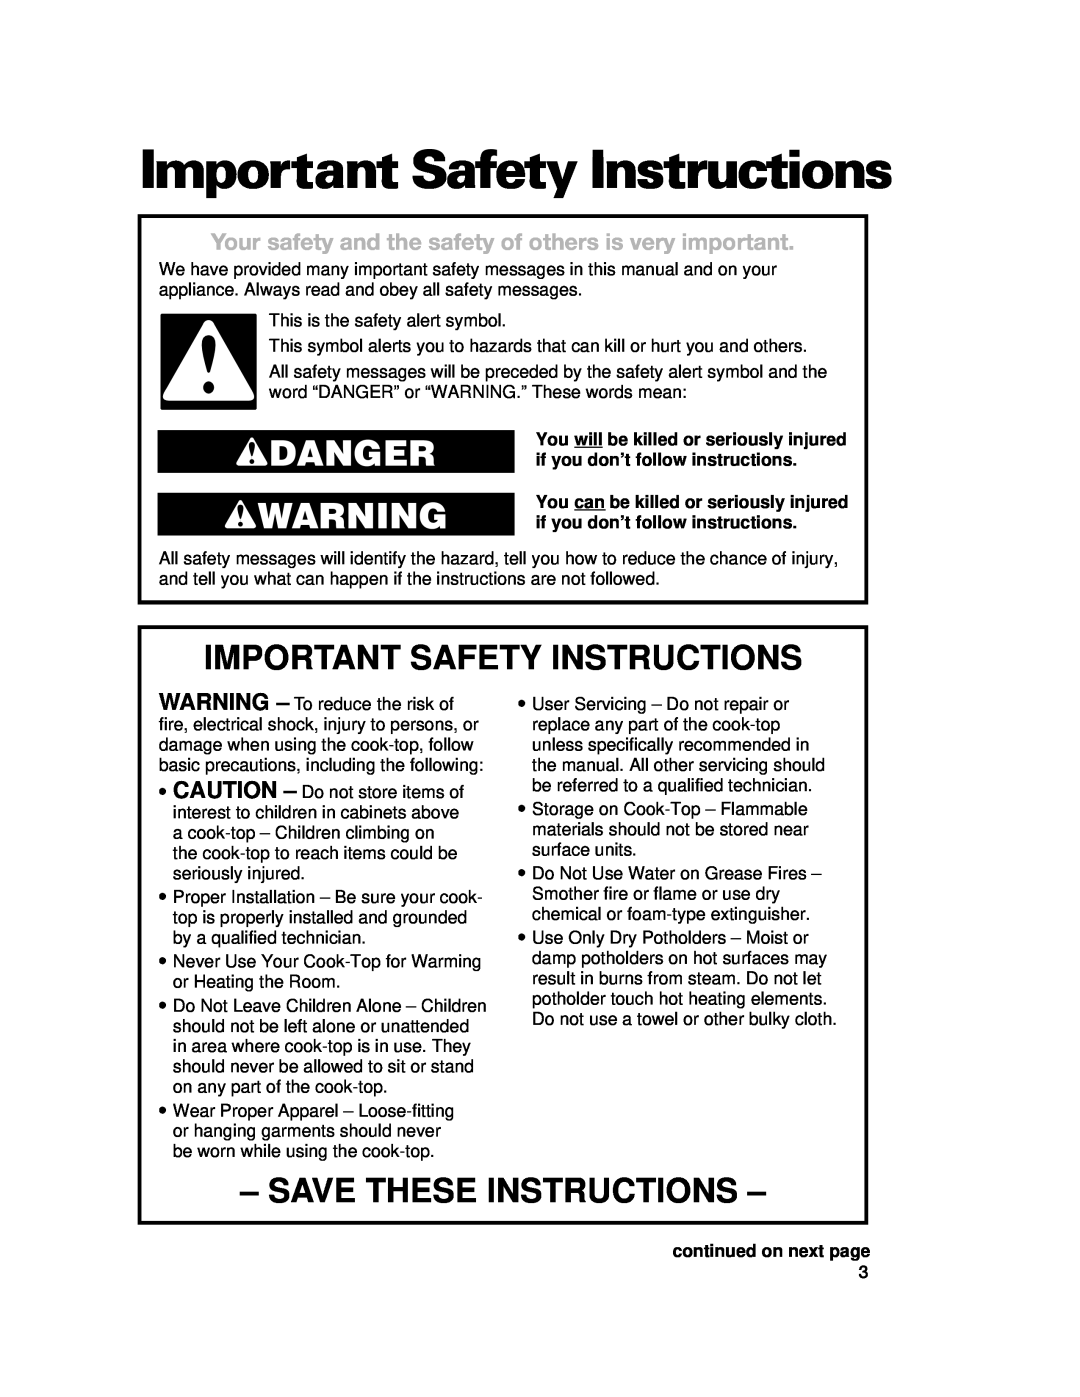 Whirlpool RCC3024G, GJC3634G, GJC3034G Important Safety Instructions, wDANGER wWARNING, Save These Instructions 